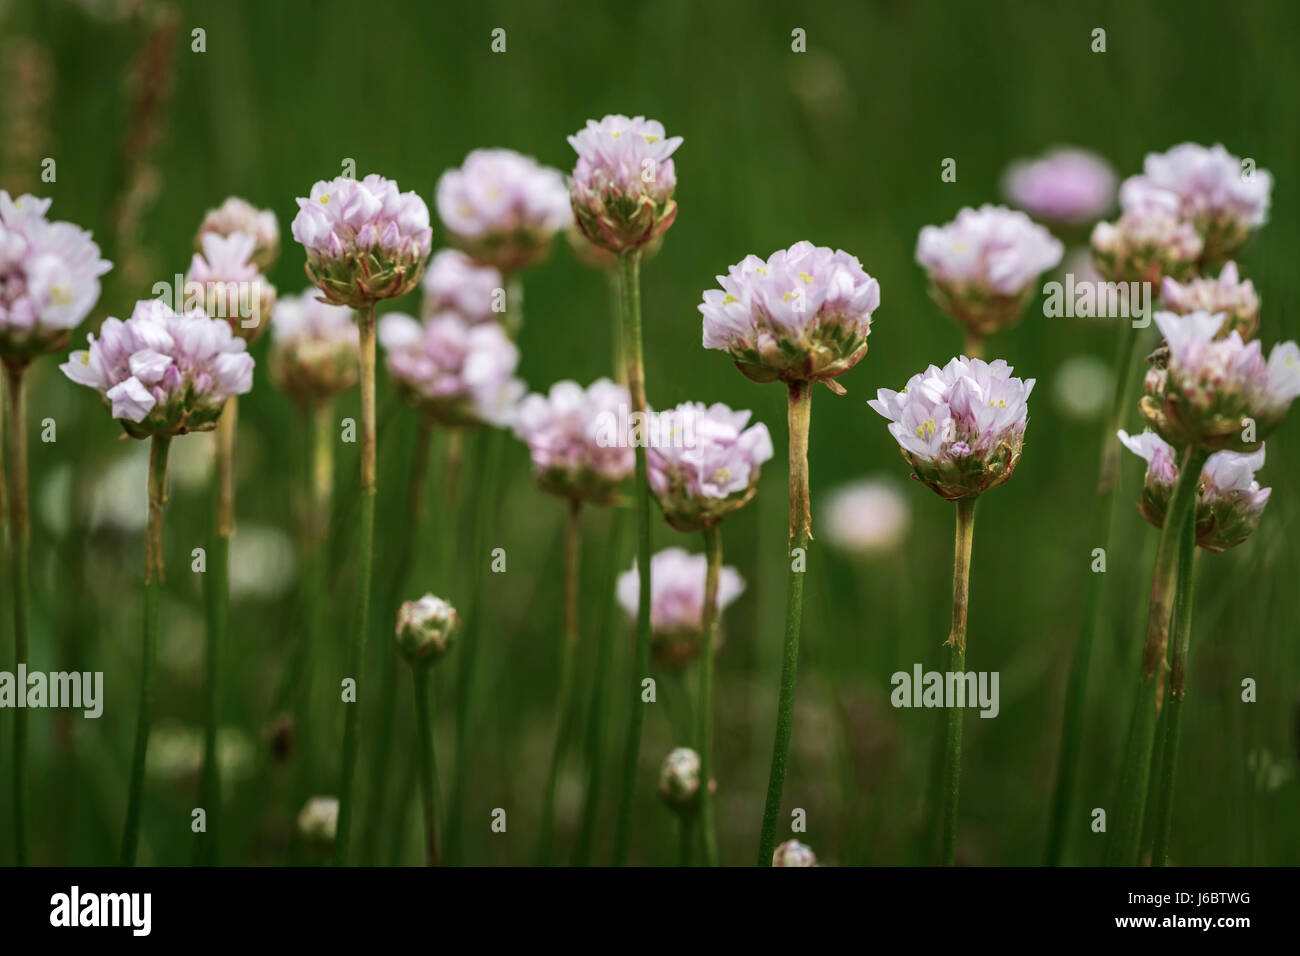 Fine art photography: Macrophotography of purple clover blossoms against green background Stock Photo